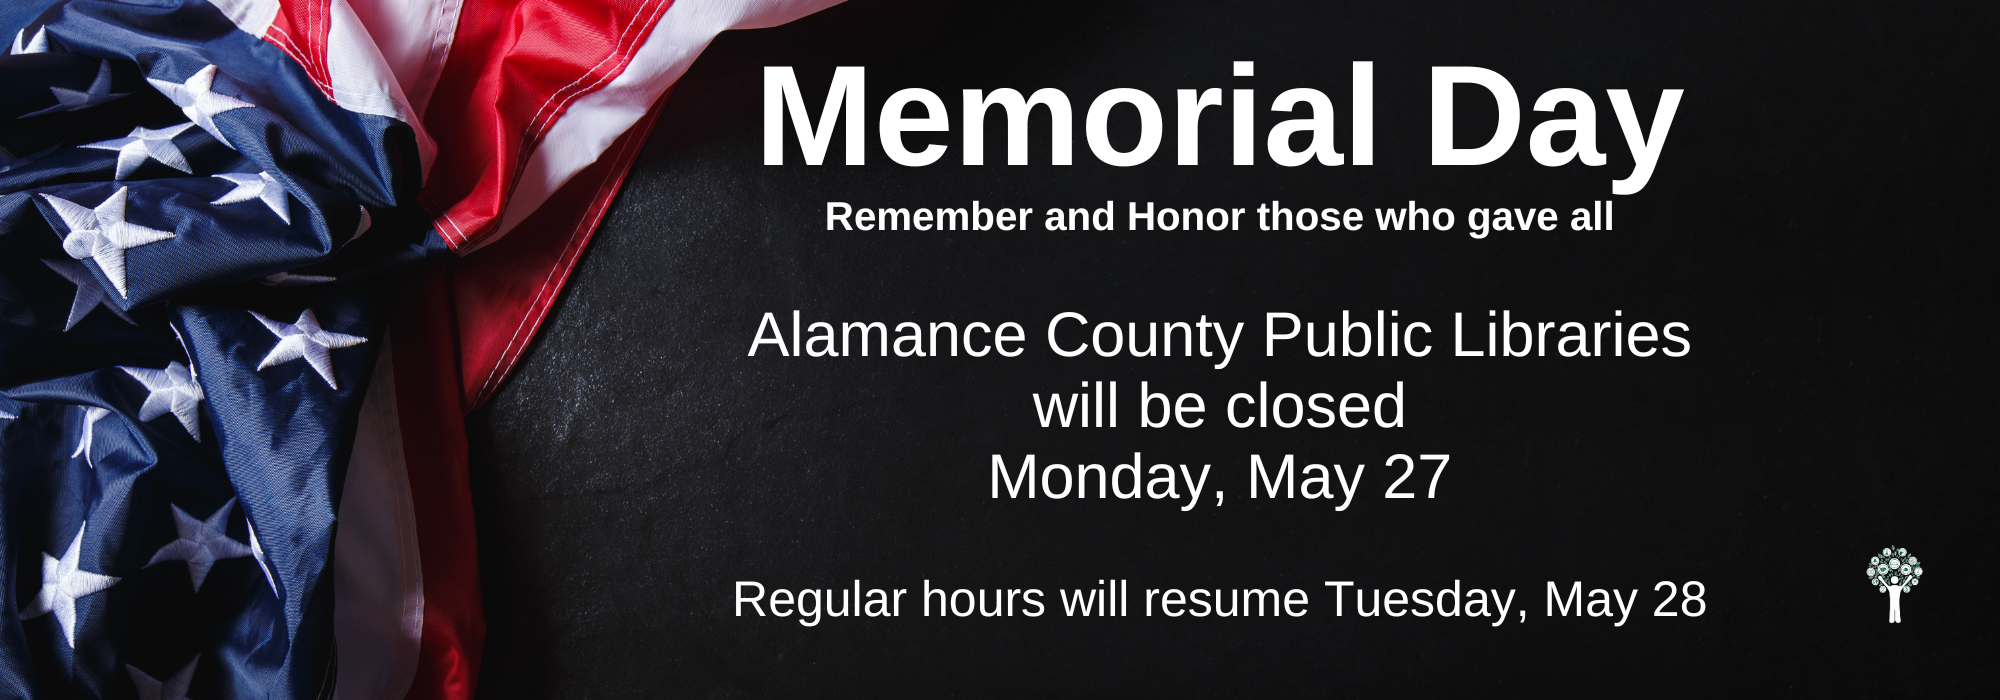 5.27 - Memorial Day All Libraries